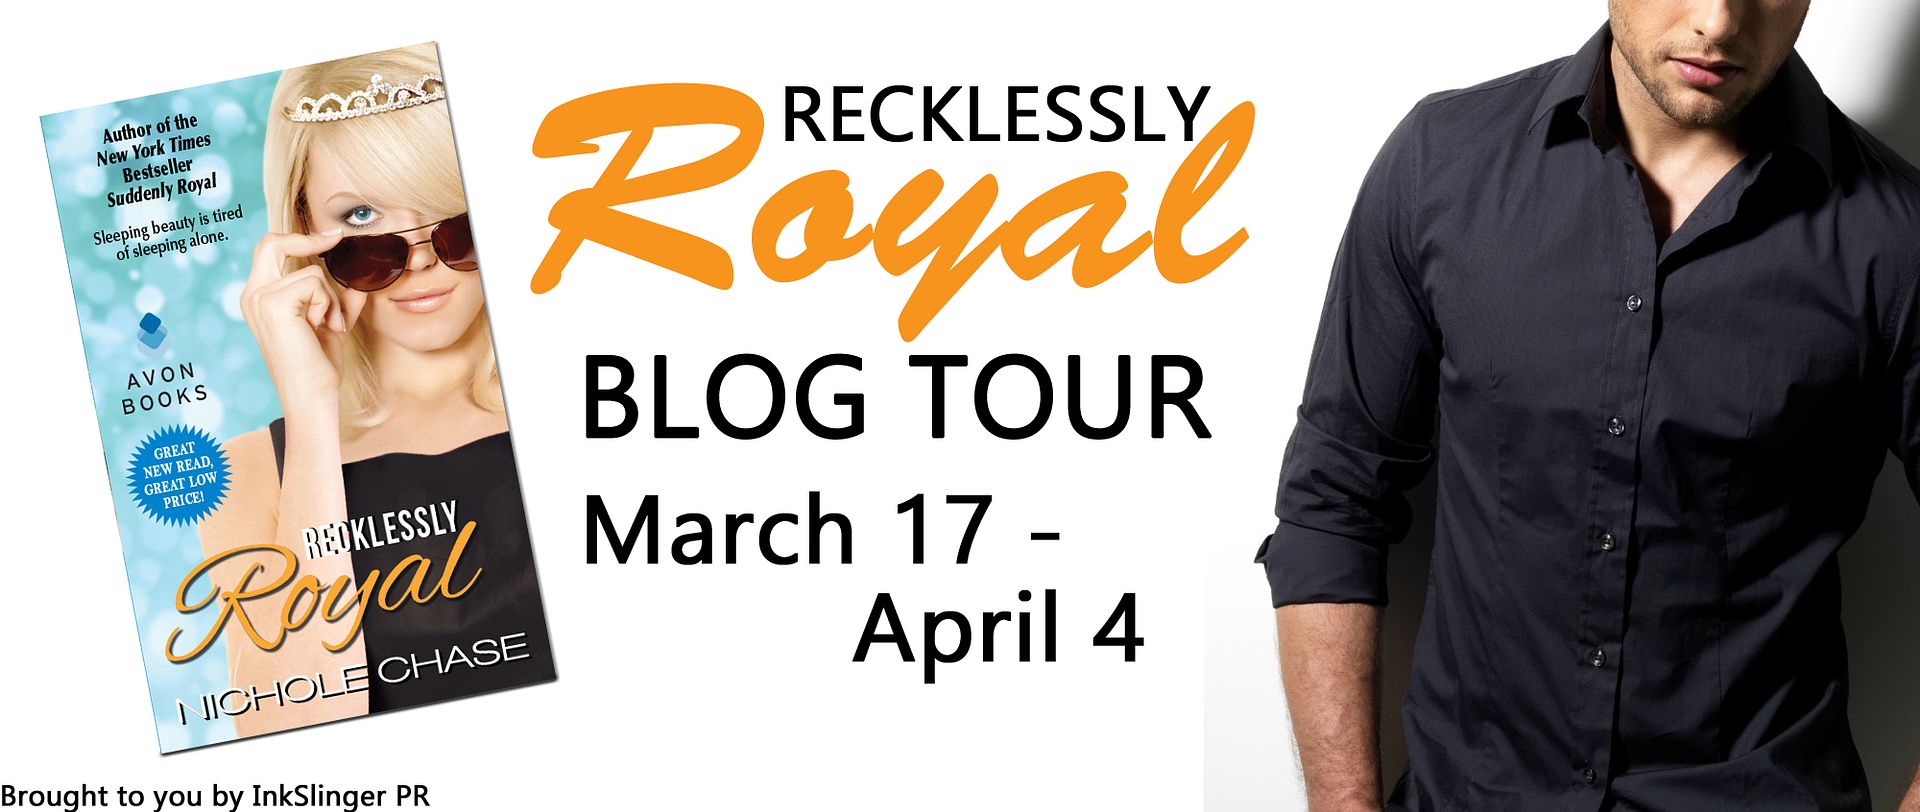 Recklessly Royal Nichole Chase Blog Tour